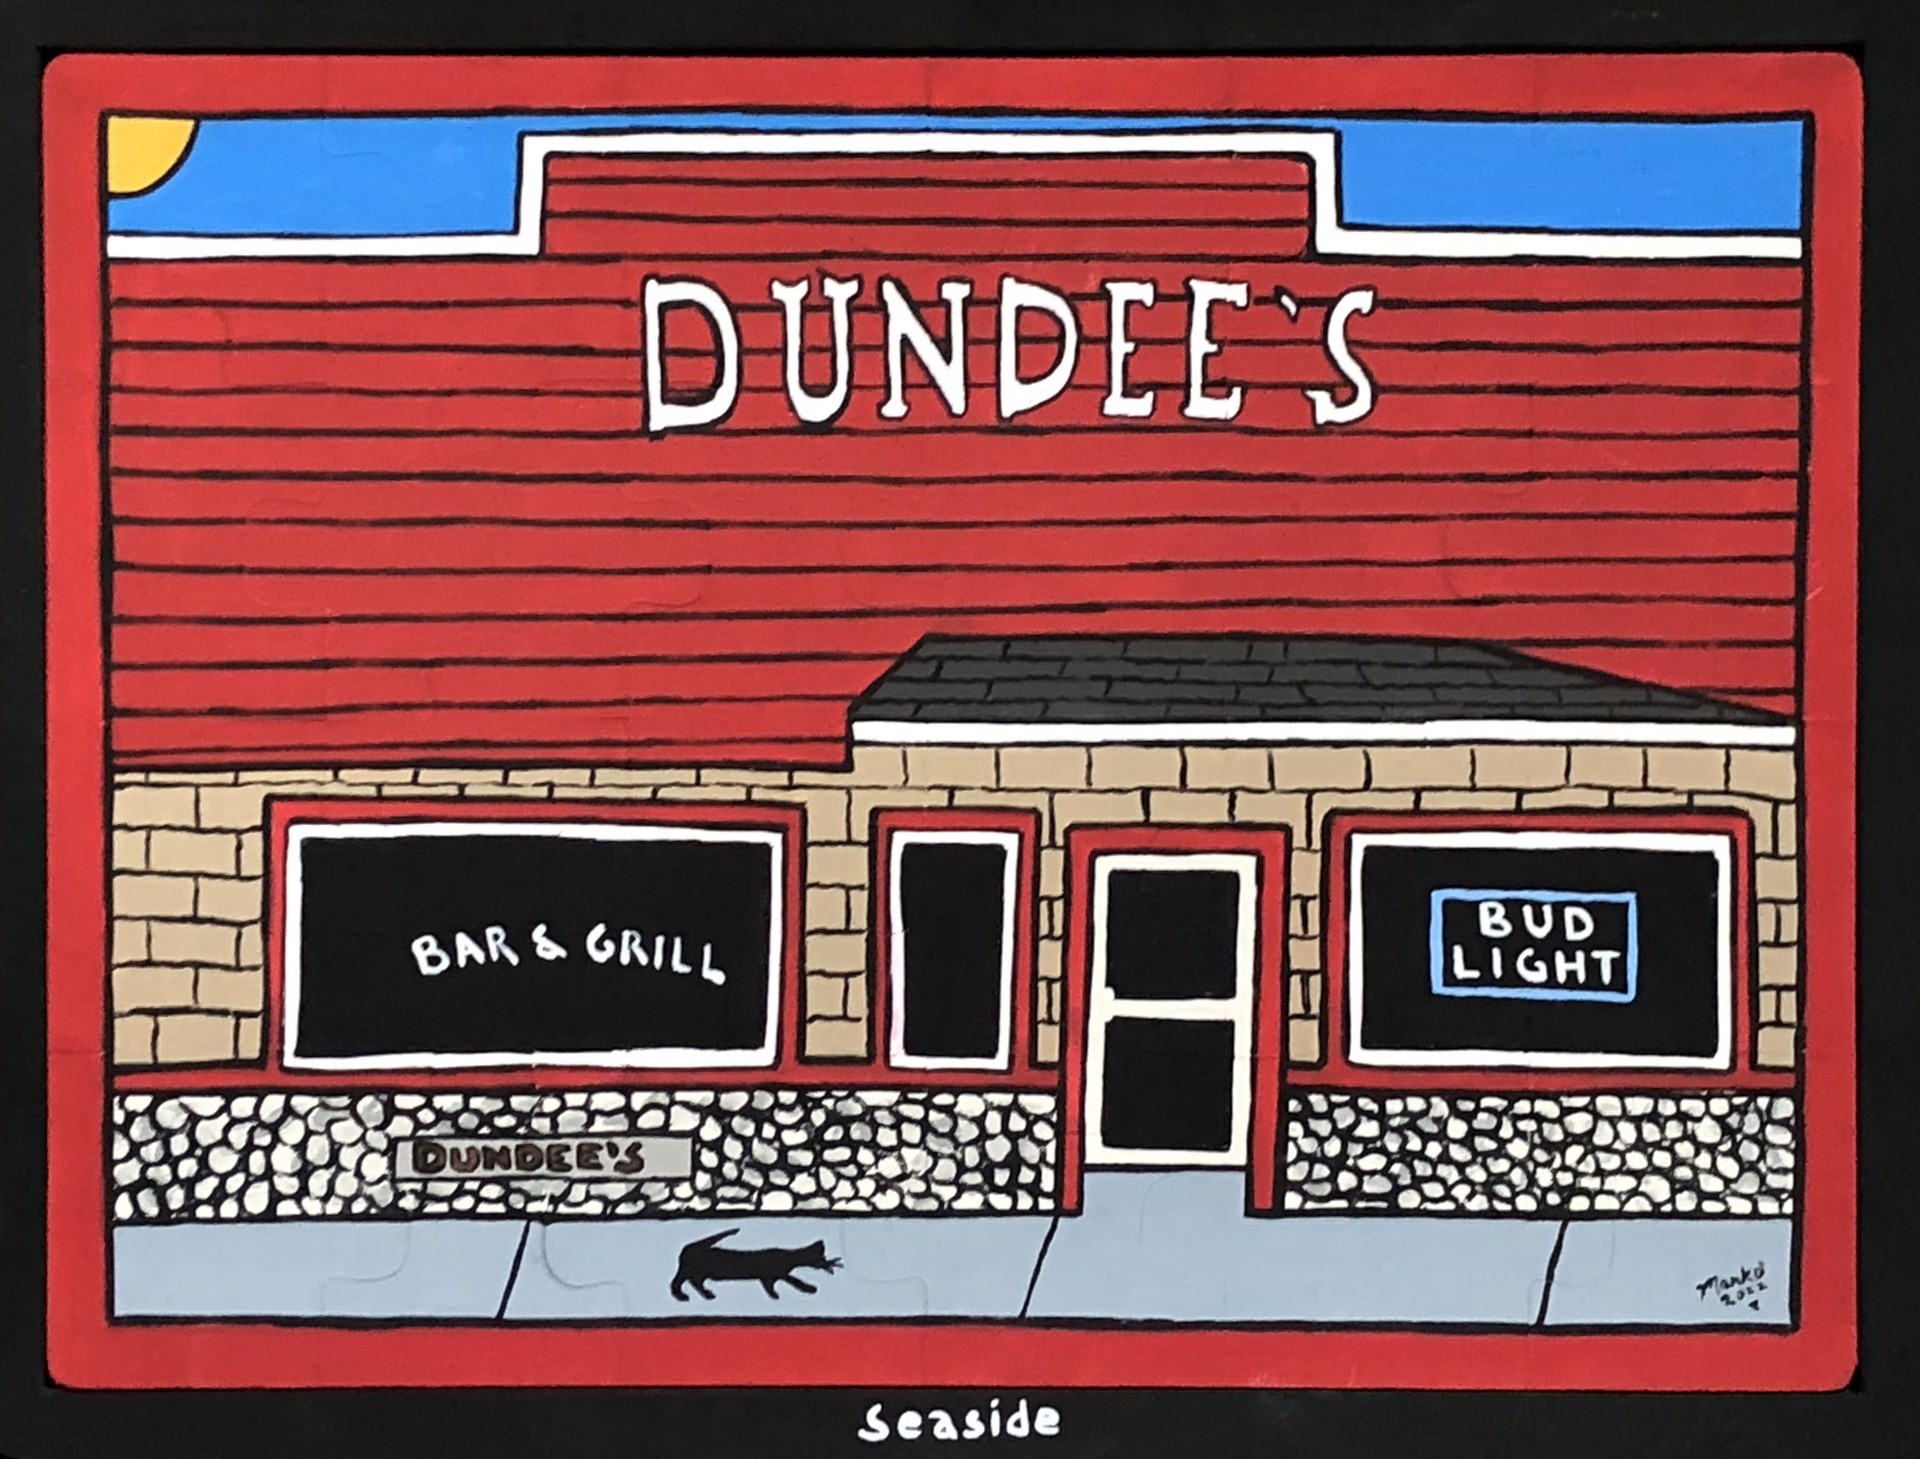 Dundee's Bar and Grill by Mark O'Malley